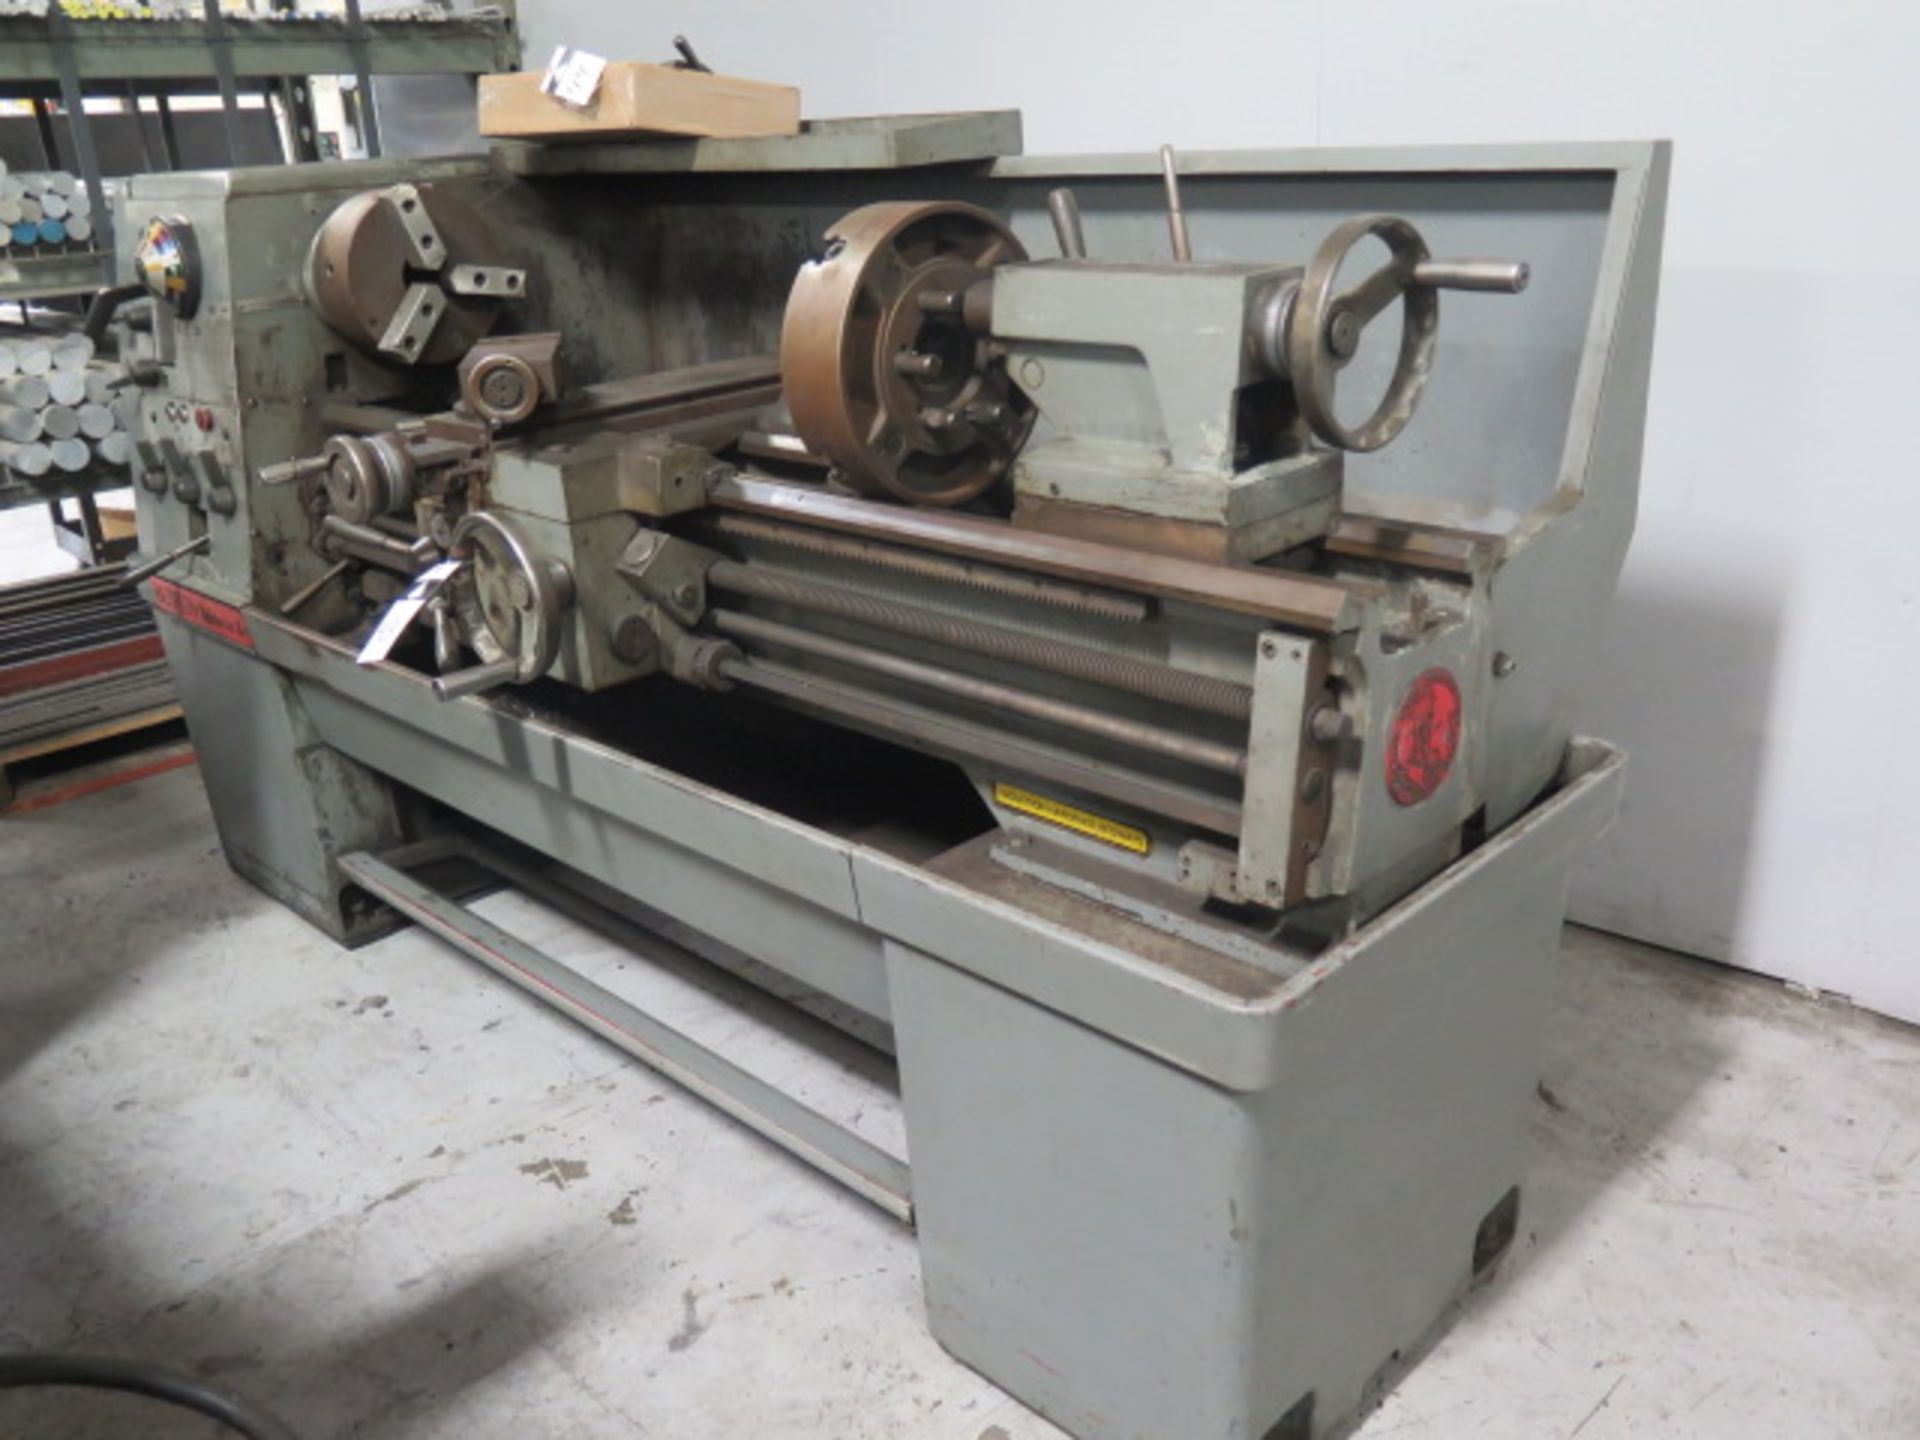 Clausing Colchester “15” 15” x 52” Geared Head Gap Bed Lathe s/ 25-2000 RPM, Taper Attachment, - Image 3 of 8